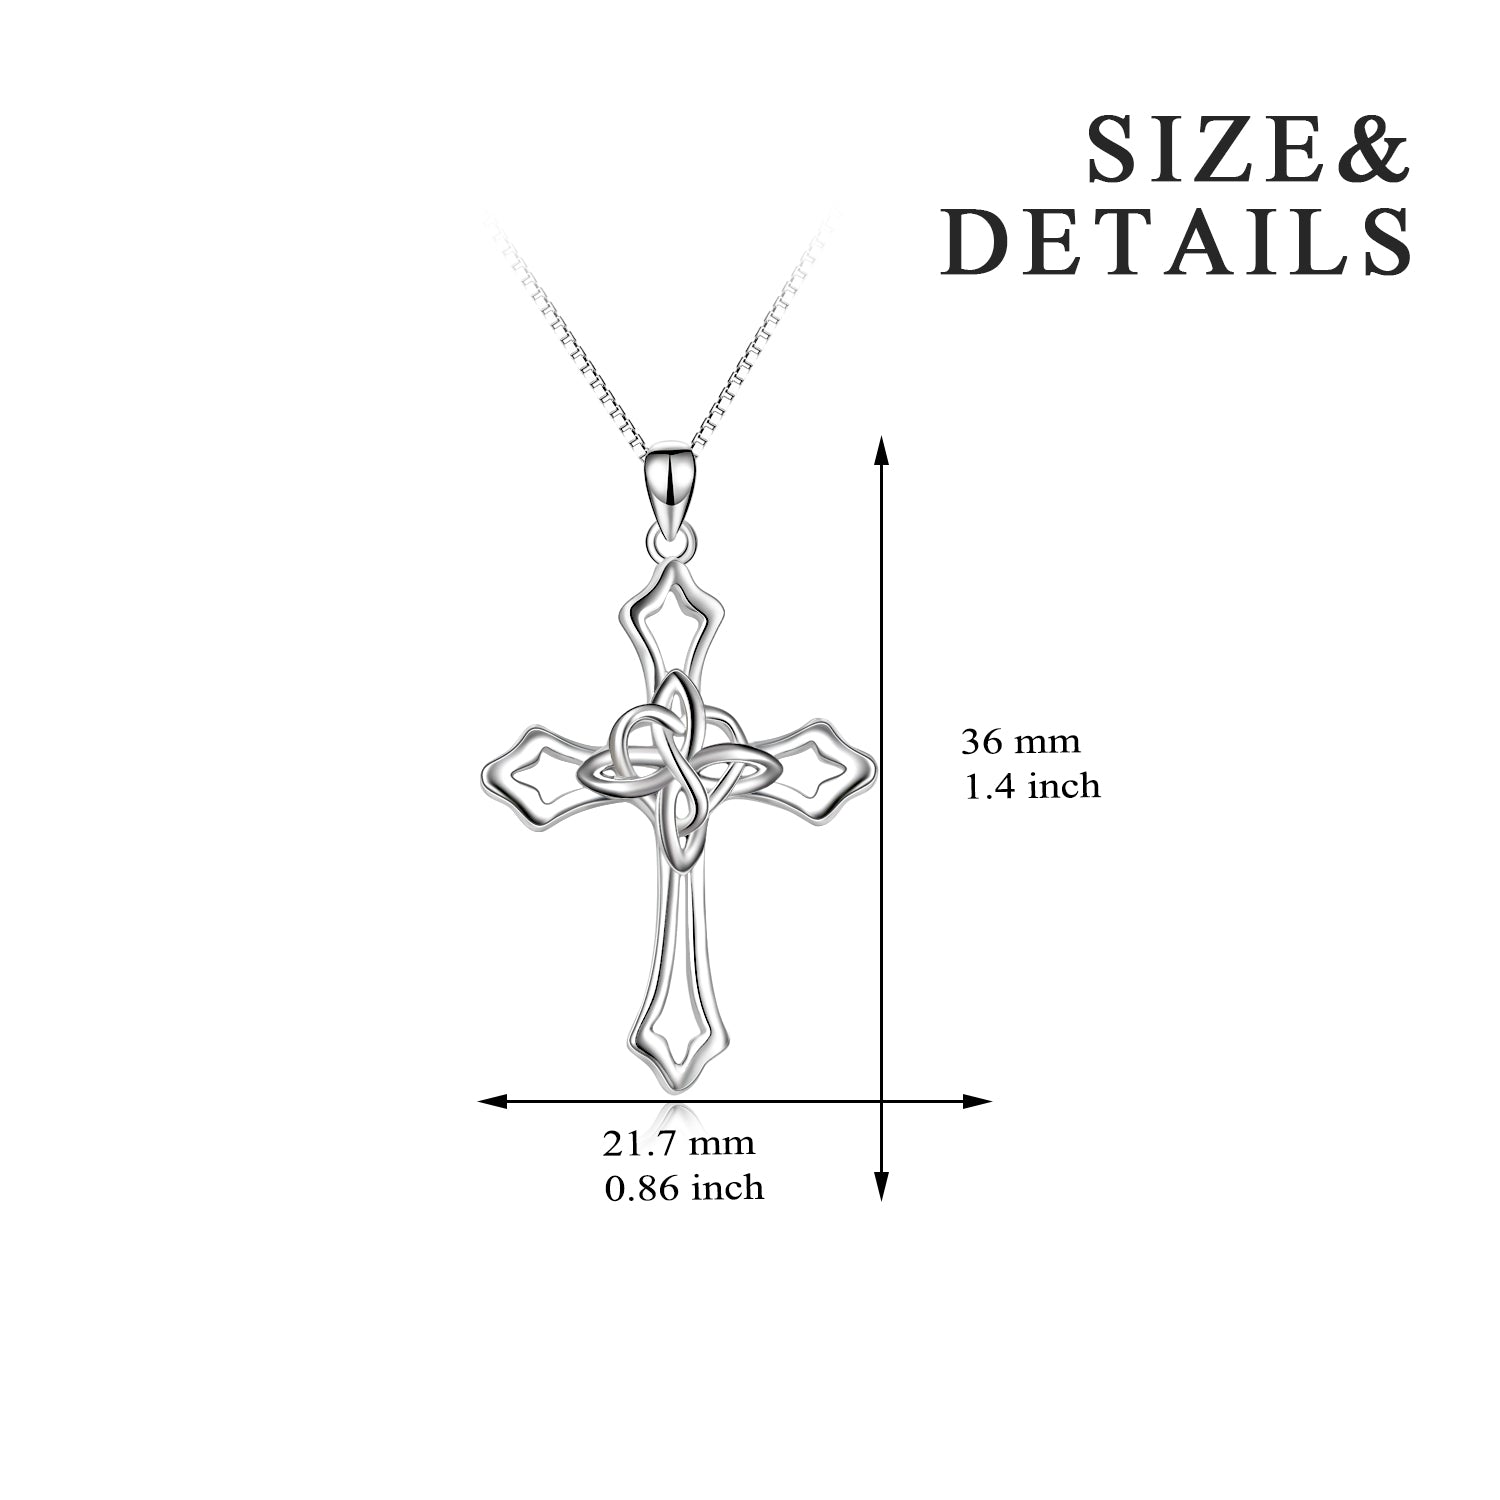 Newly Design 925 Sterling Silver Pendant Necklace Gothic Cross Pendant Necklace